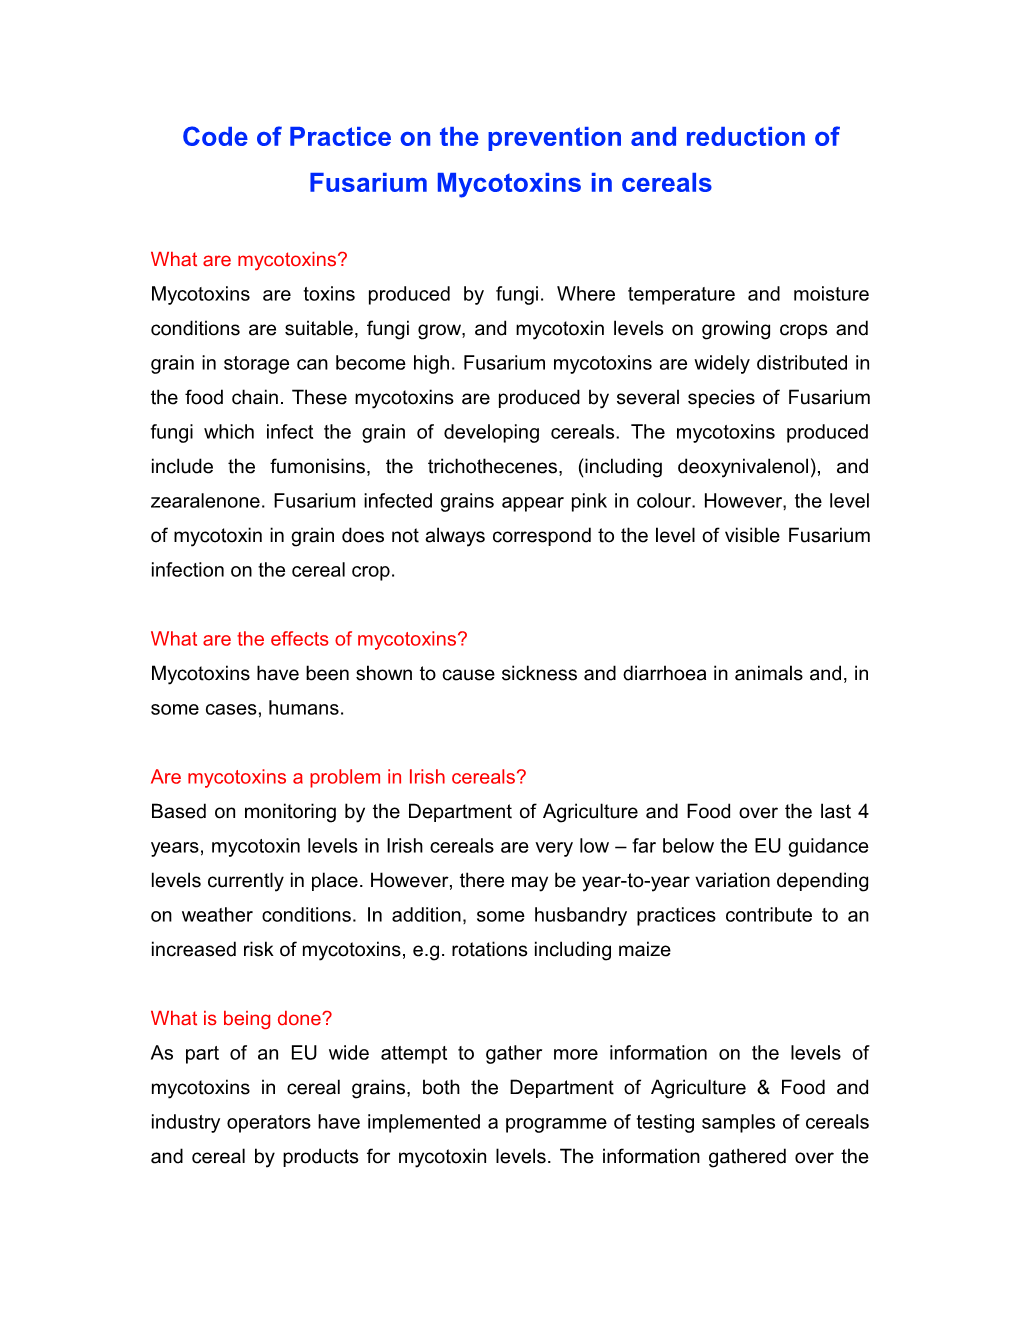 Code of Practice on the Prevention and Reduction of Fusarium Mycotoxins in Cereals